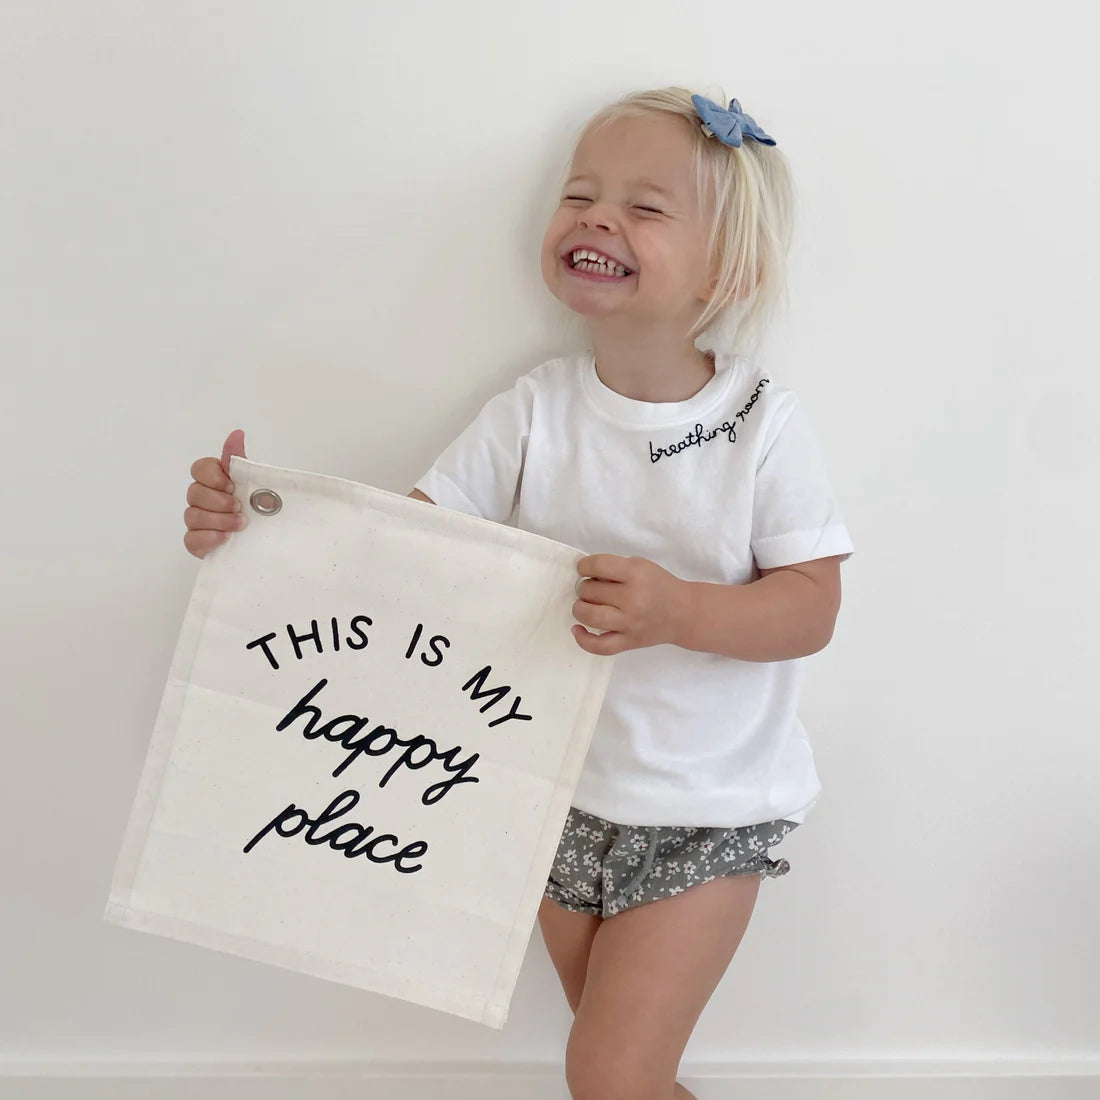 “Happy Place“ Banner